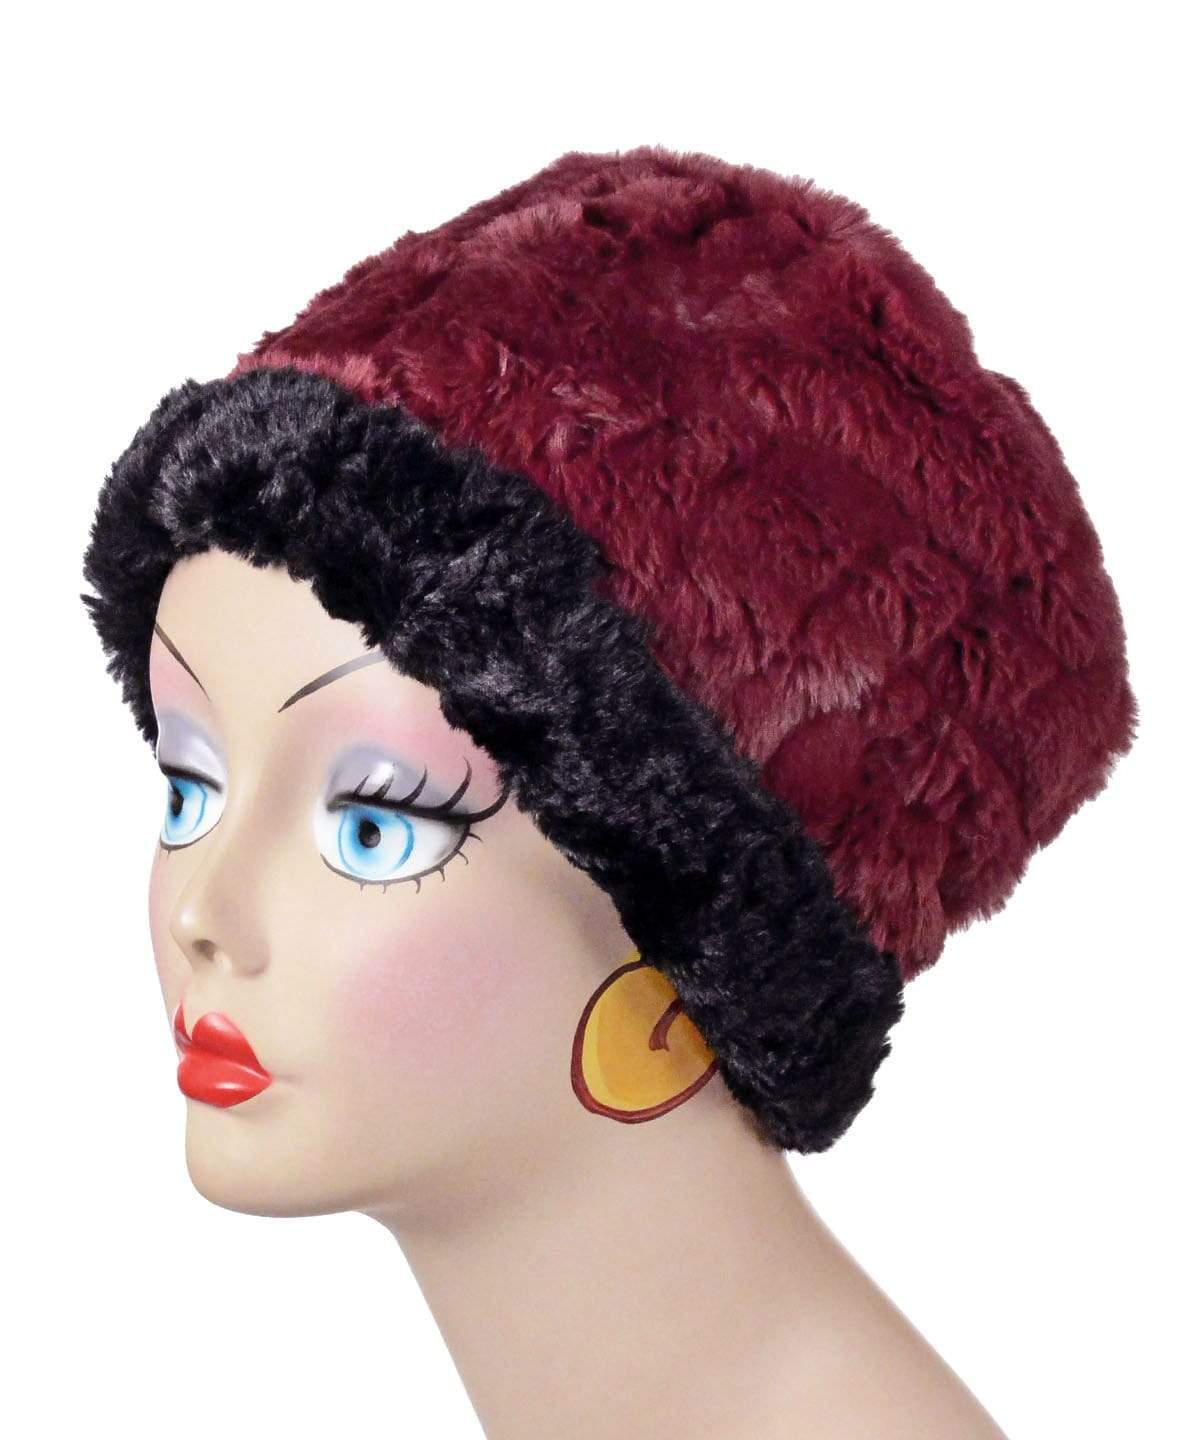   Women&#39;s Cuffed Pillbox on mannequin shown with short cuff | Cranberry Creek Faux Fur  with Cuddly Black| Handmade USA by Pandemonium Seattle